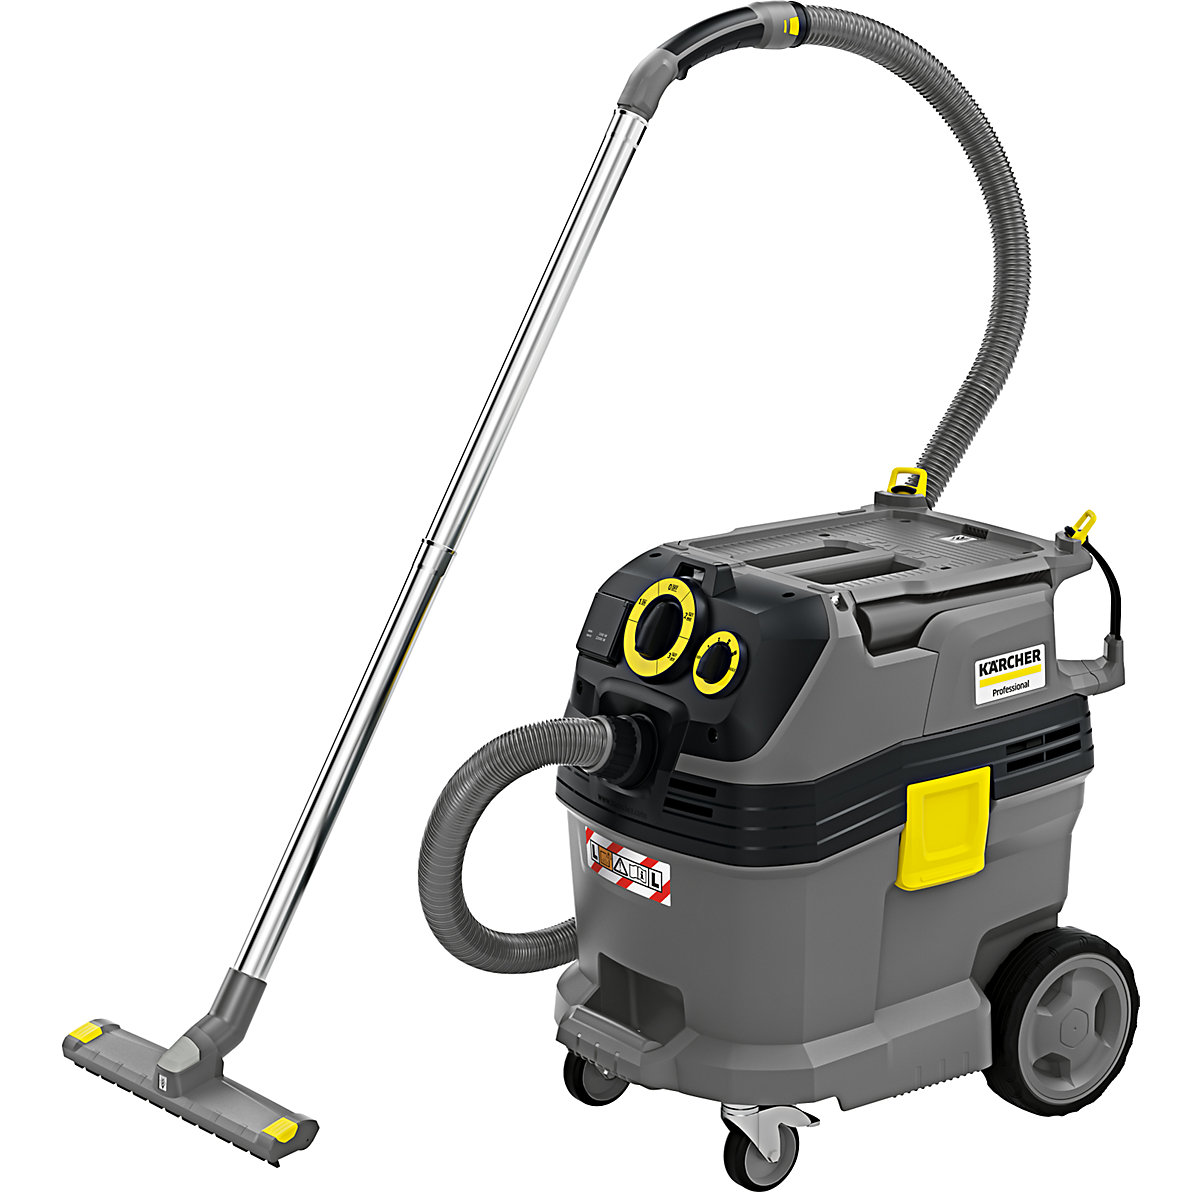 Wet and dry vacuum cleaner - Kärcher